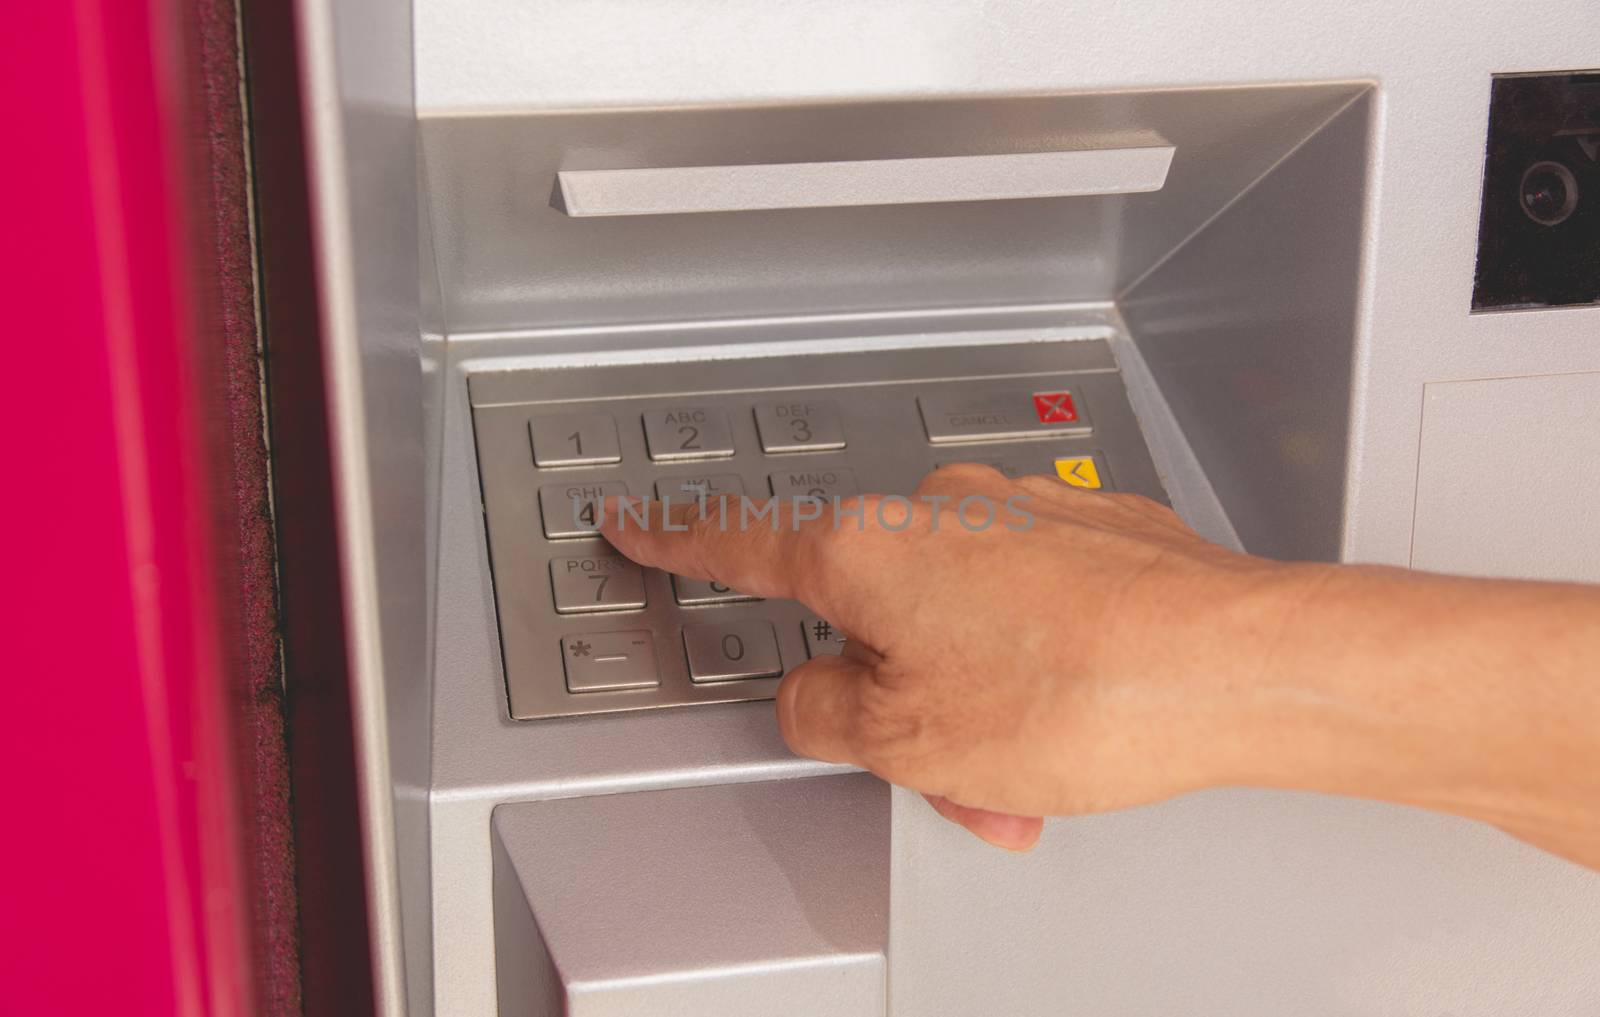 Hand of a woman push button in ATM, using an ATM. Woman using an ATM machine.